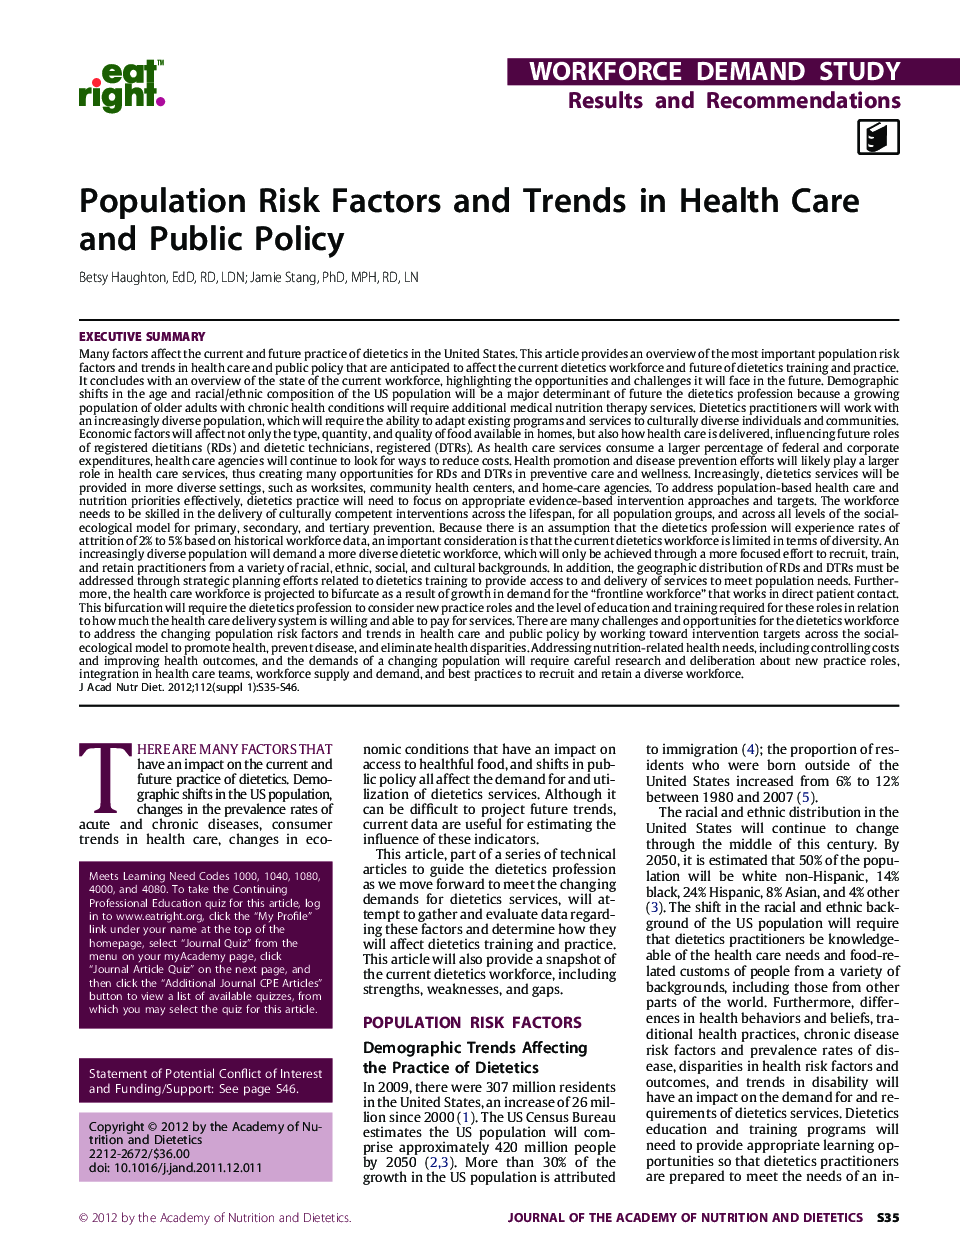 Population Risk Factors and Trends in Health Care and Public Policy 